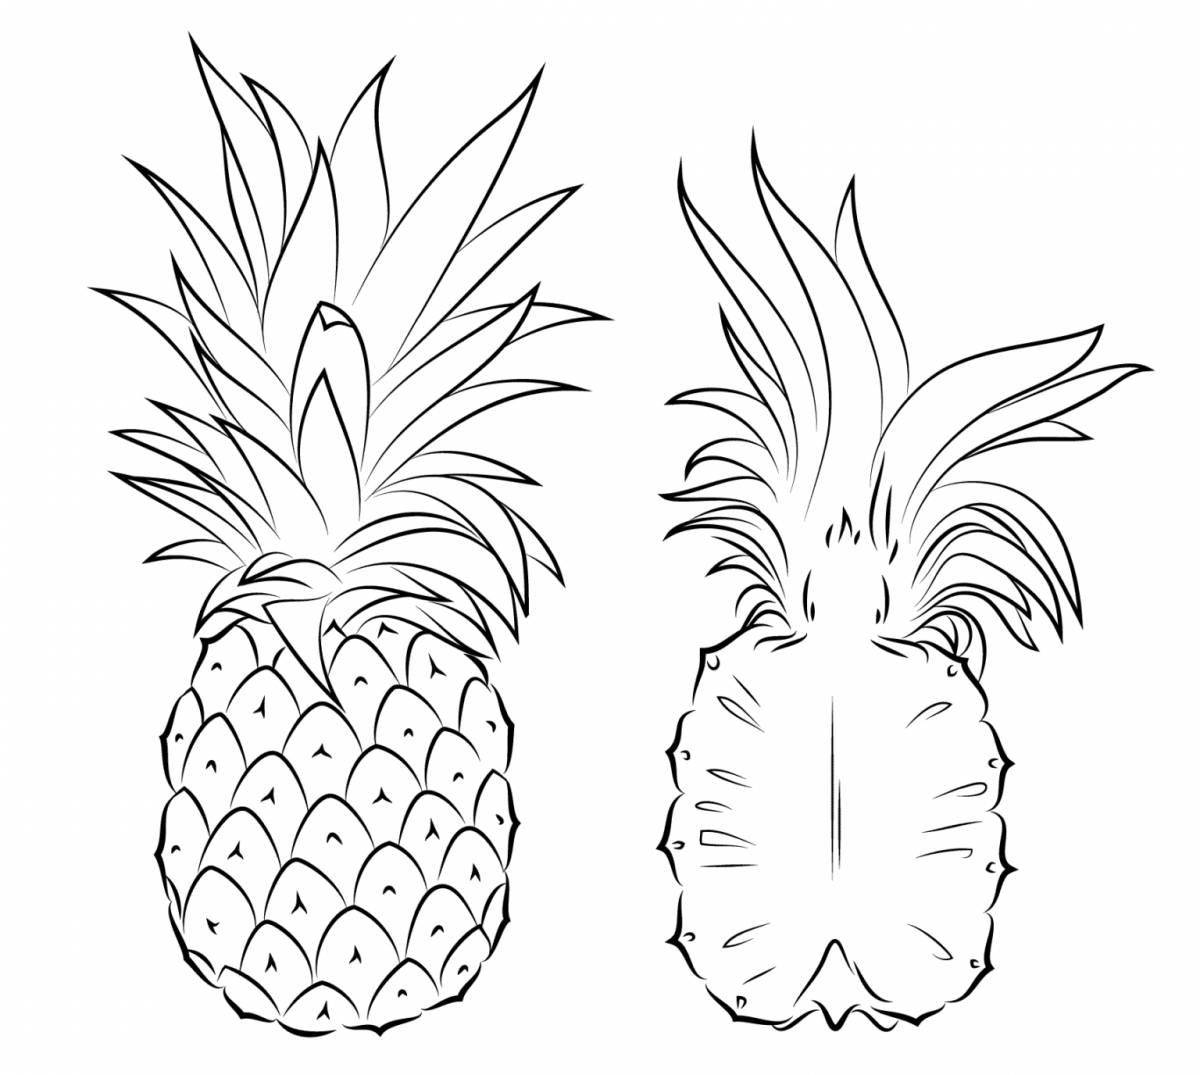 Adorable pineapple coloring book for kids